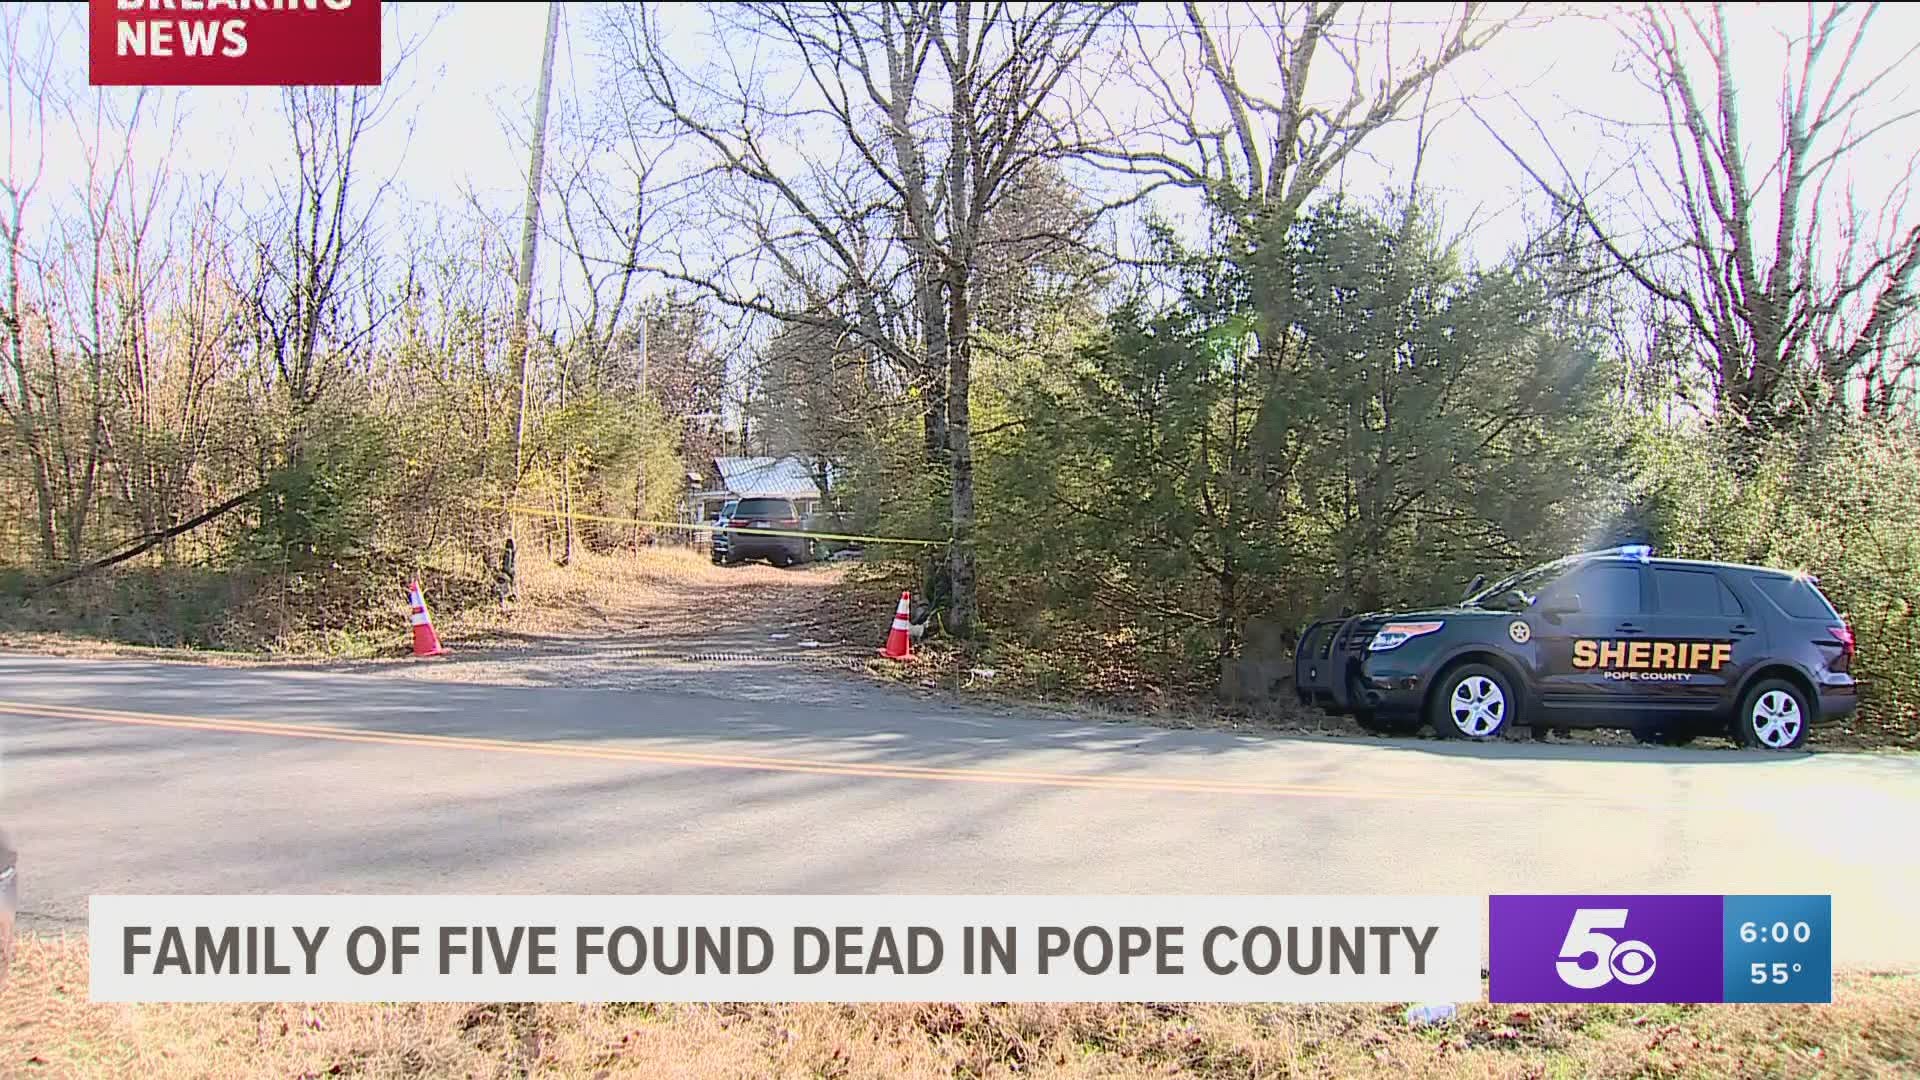 Two women and three girls have been found dead in a home in northwest Arkansas.